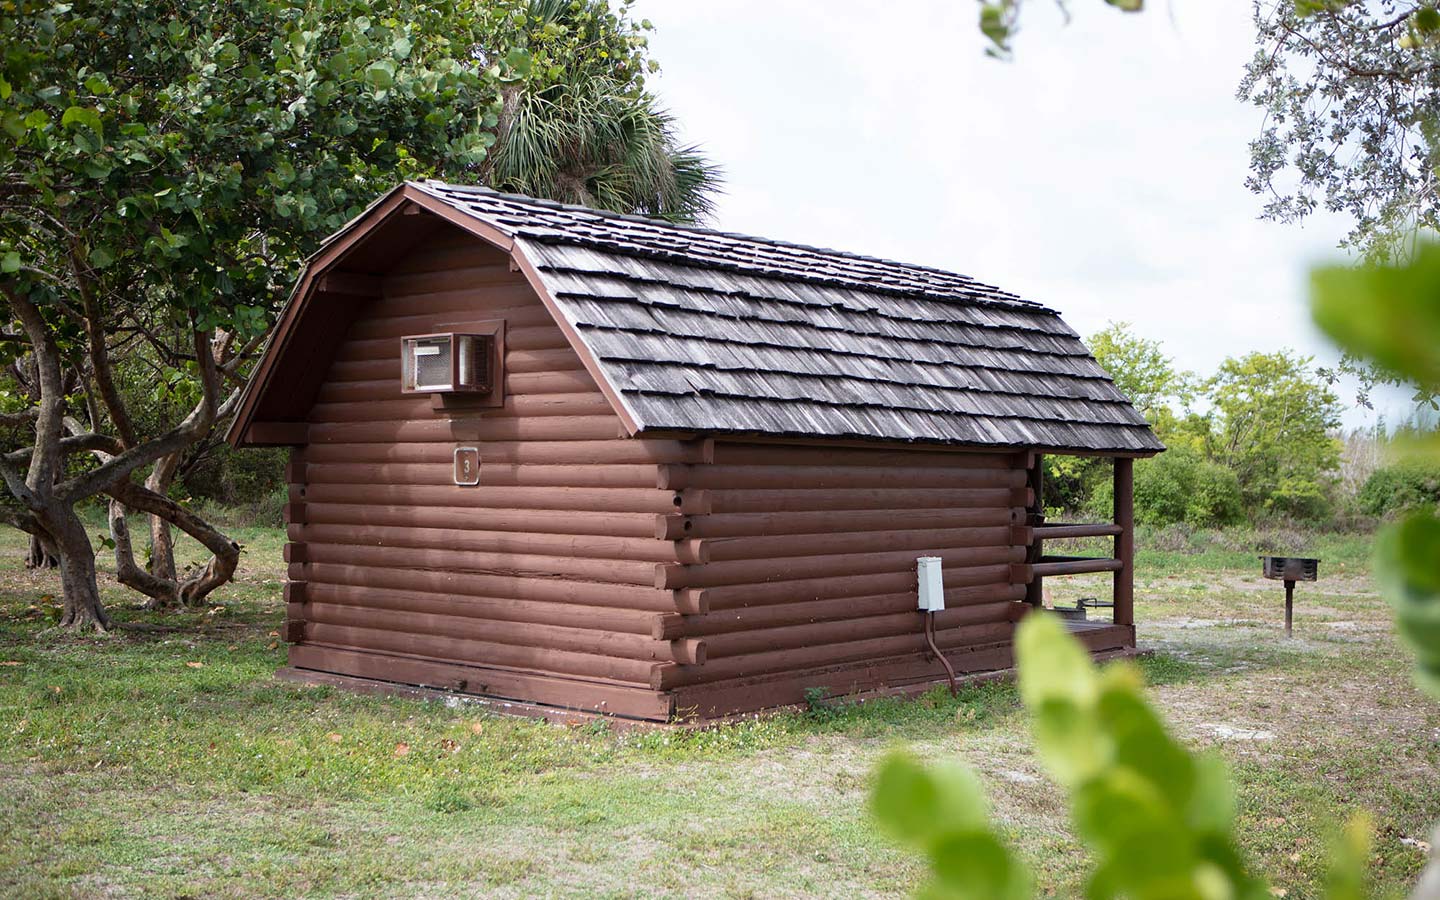 Camp overnight in a cabin at Oleta State Park